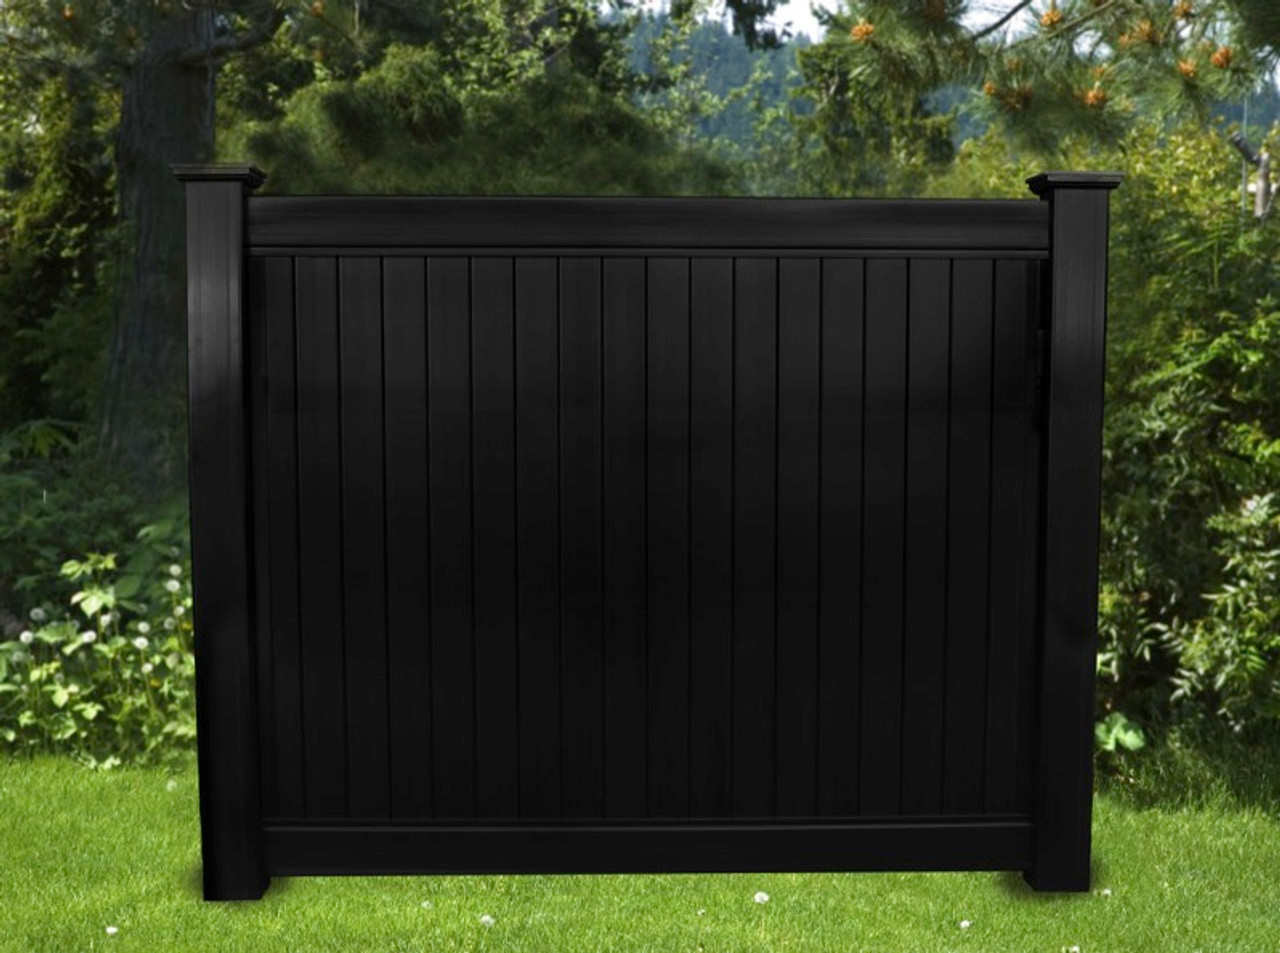 https://cdn11.bigcommerce.com/s-r3nld/images/stencil/1280x1280/products/1719/1717/black_vinyl_privacy_fence_6ft_x_6ft_3__50724.1450129212.jpg?c=2